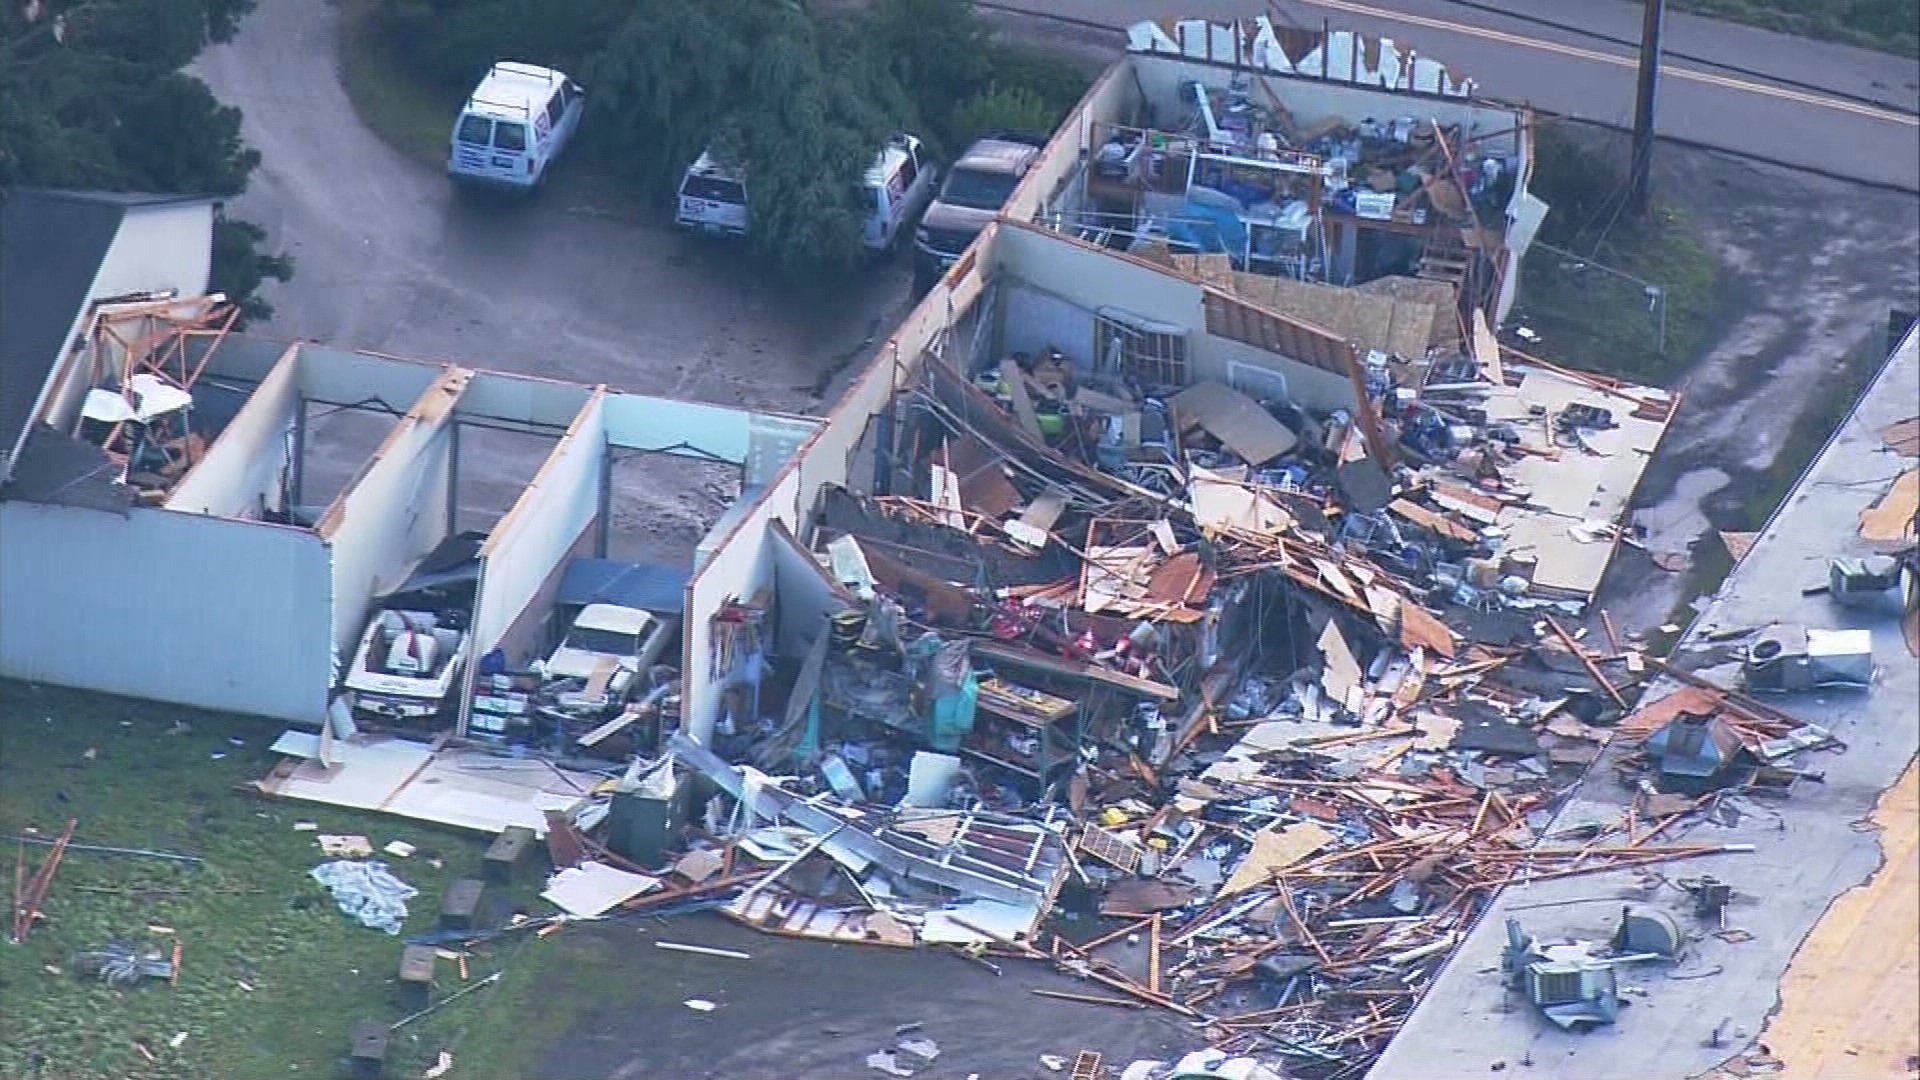 SkyKING aerials show severe damage from a tornado that ripped through Port Orchard on Tuesday.